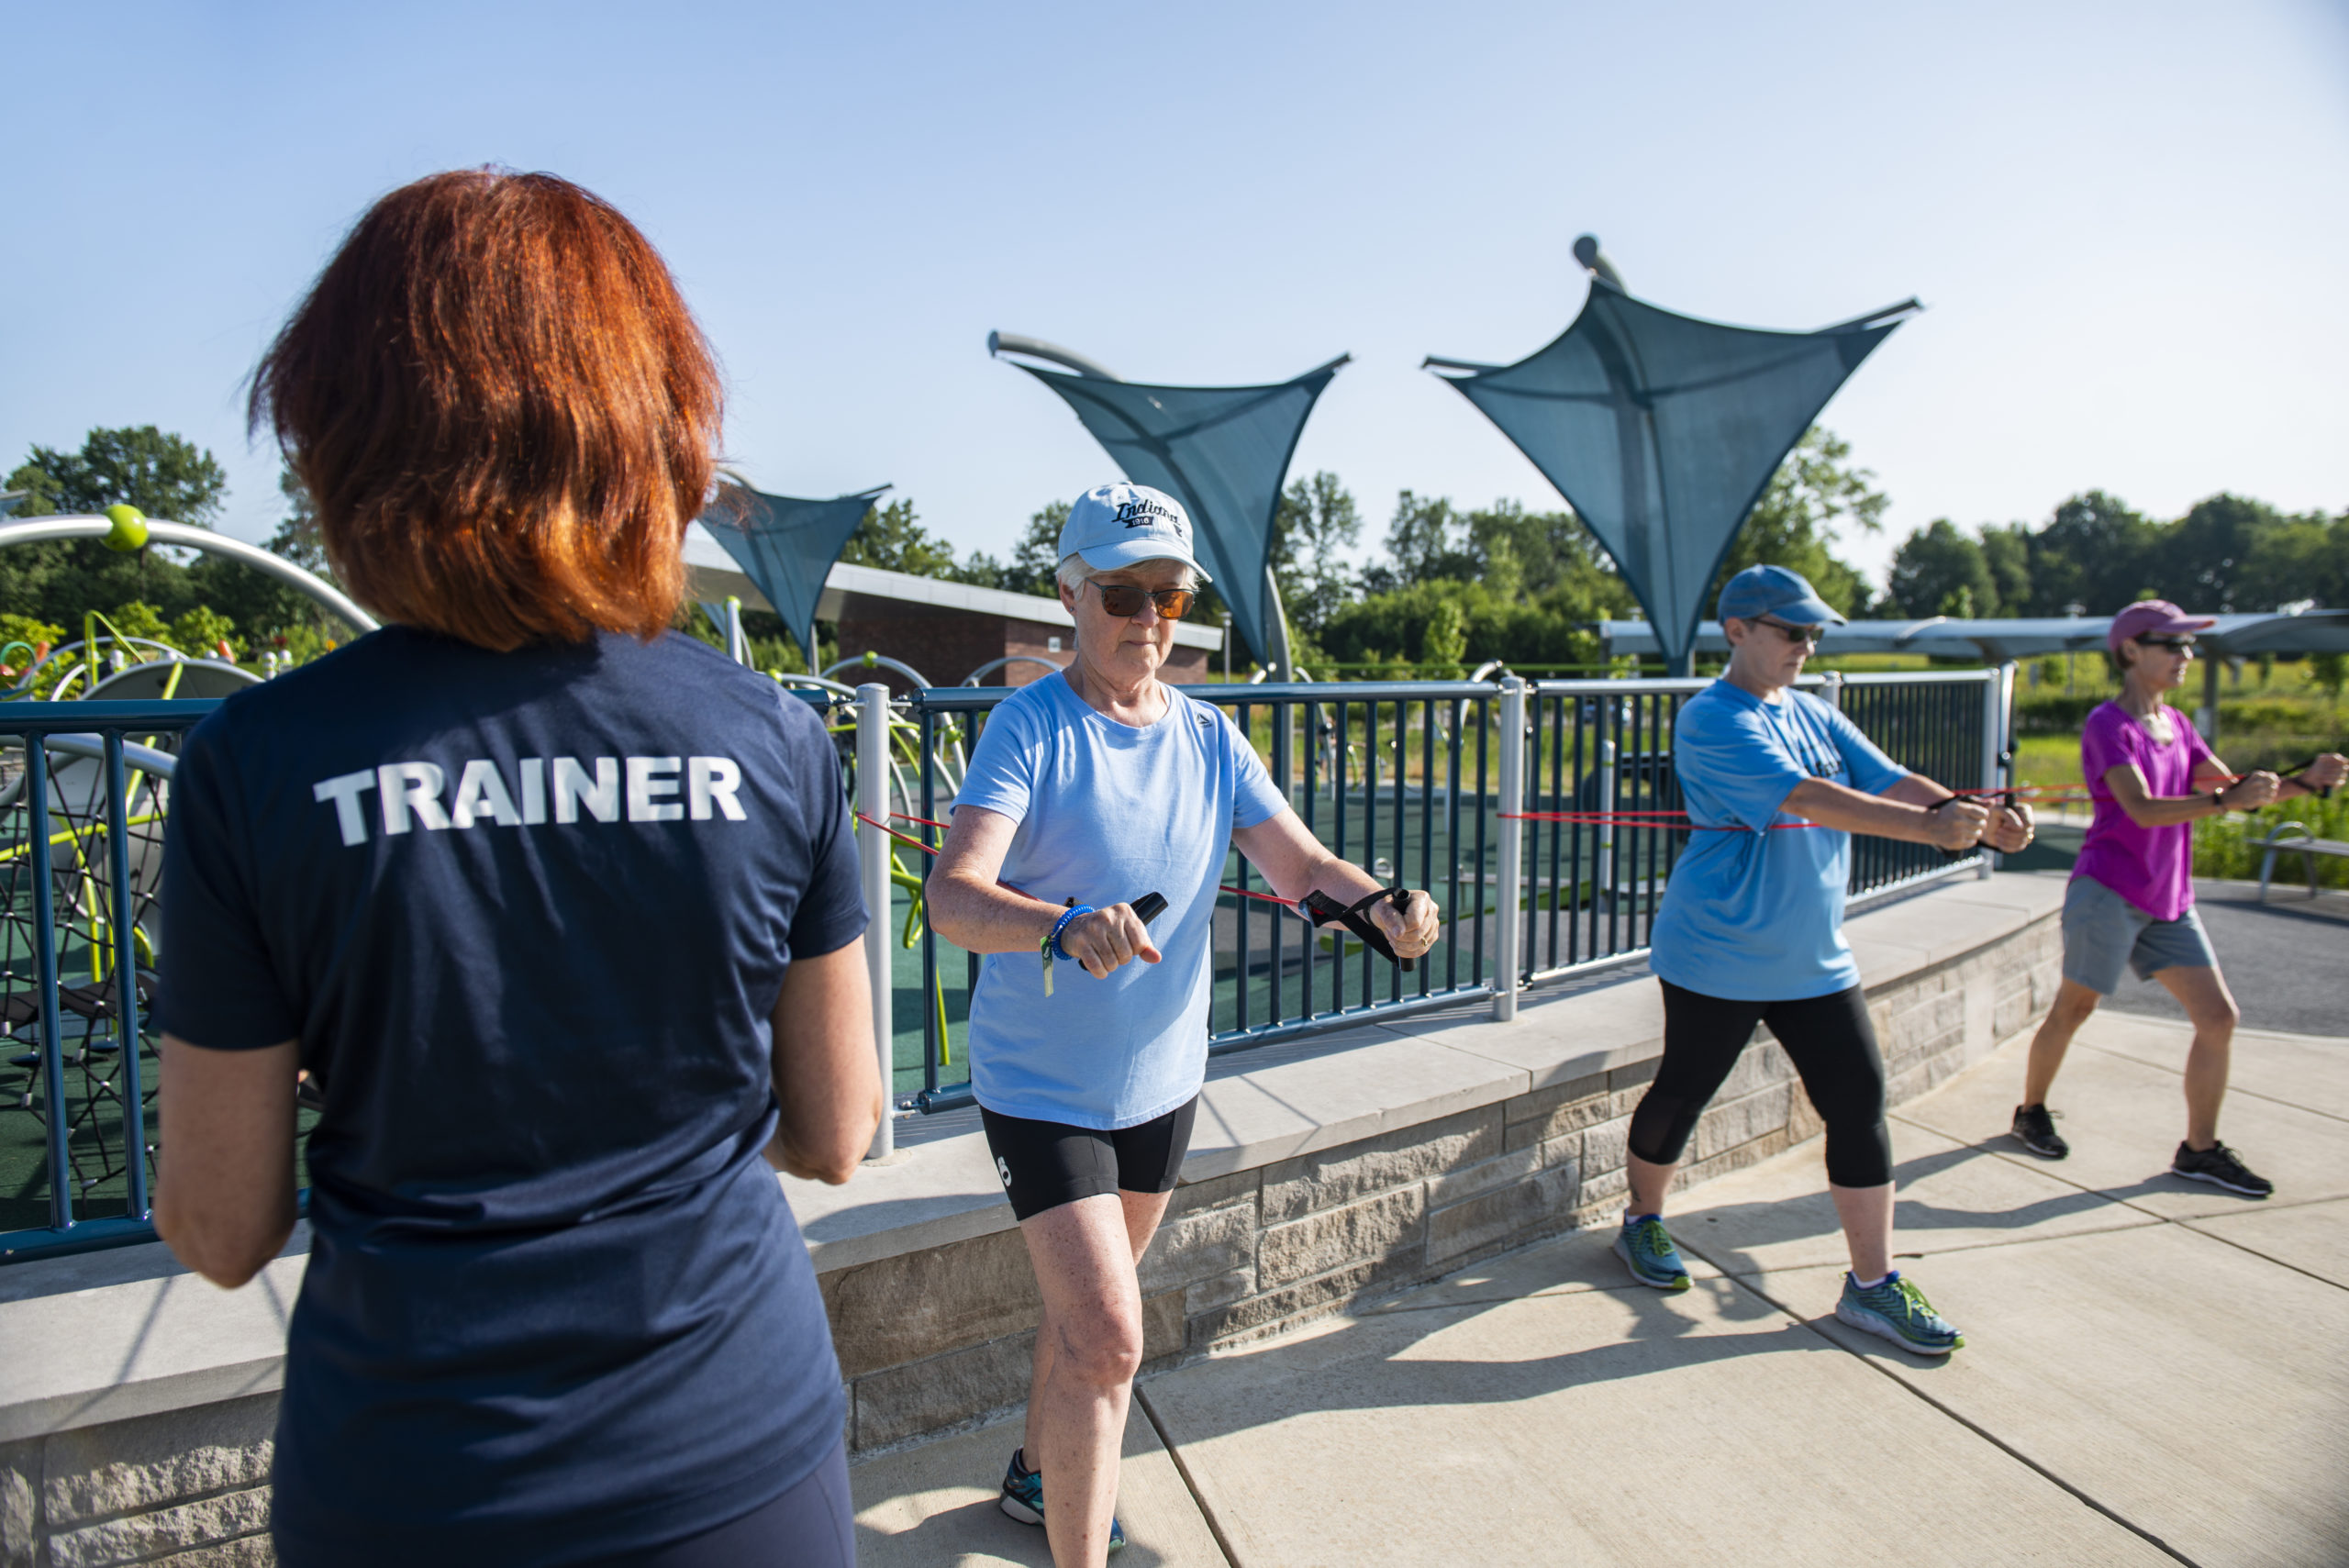 Trainer works with 3 training clients during a group fitness class. Participants use stretch bands along the wall at Central Park.